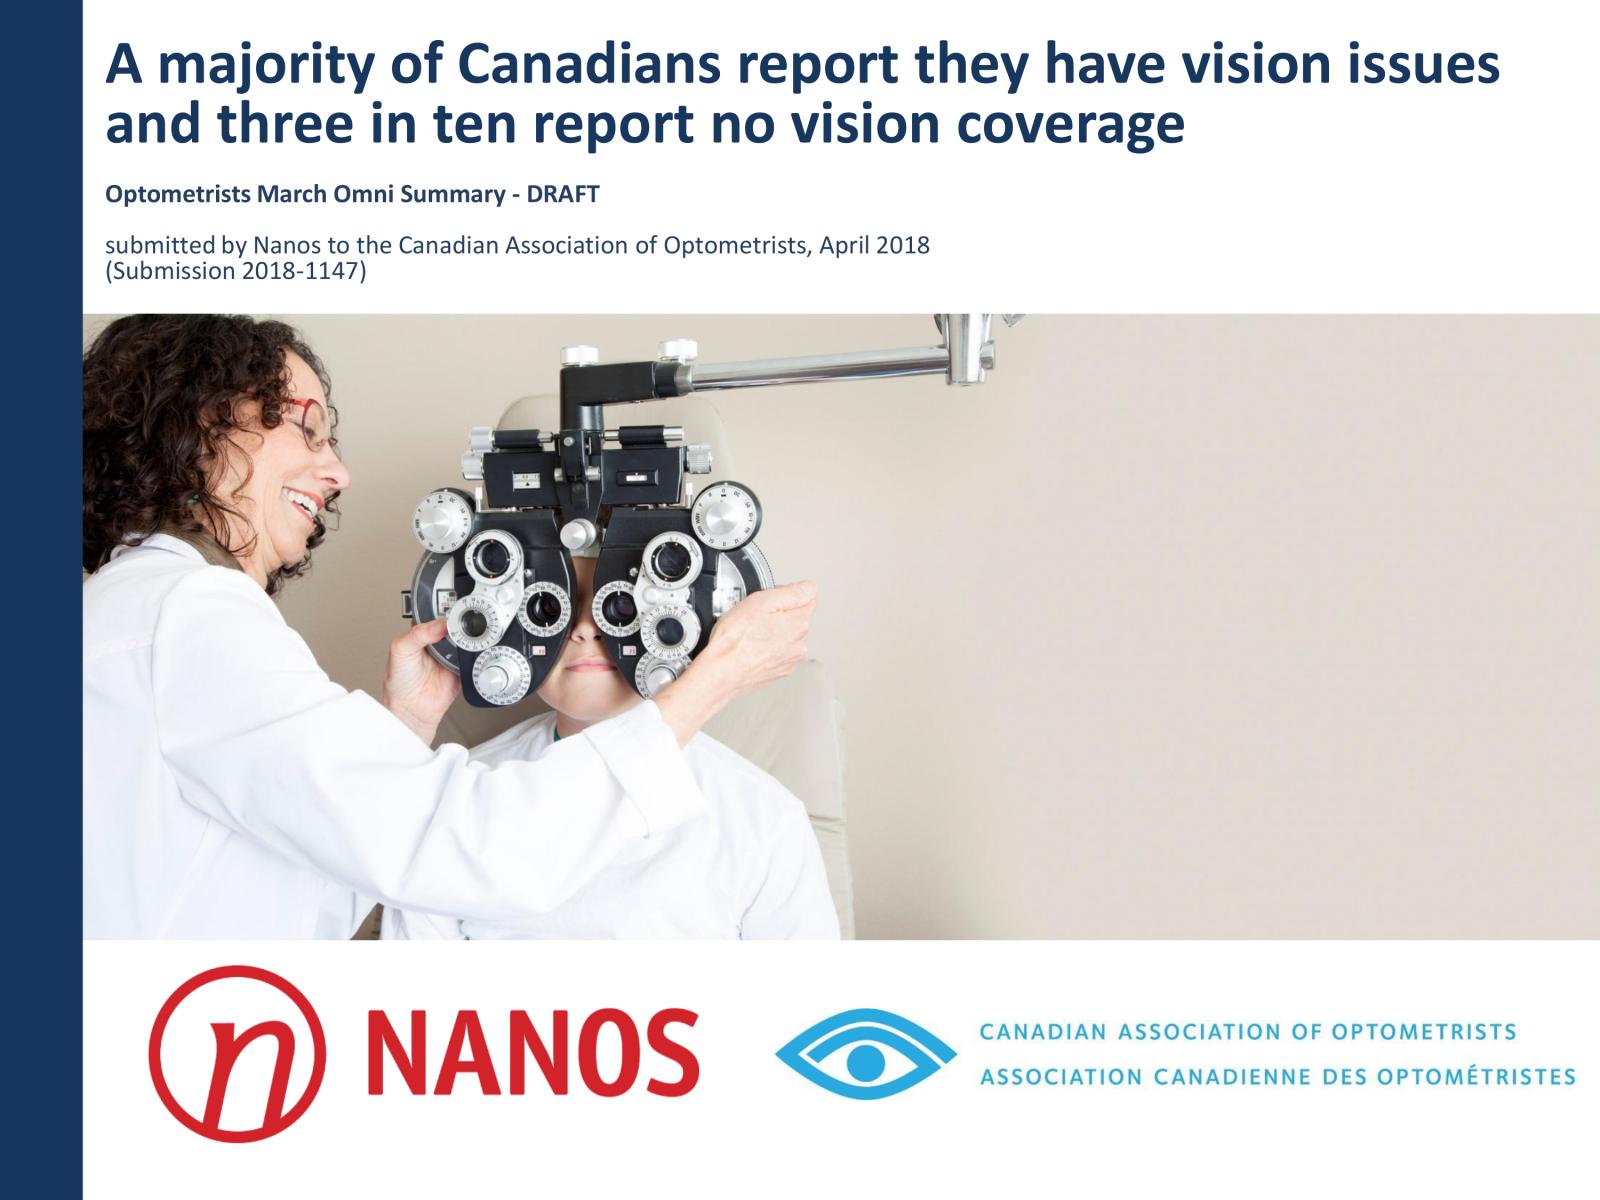 A majority of Canadians report they have vision issues